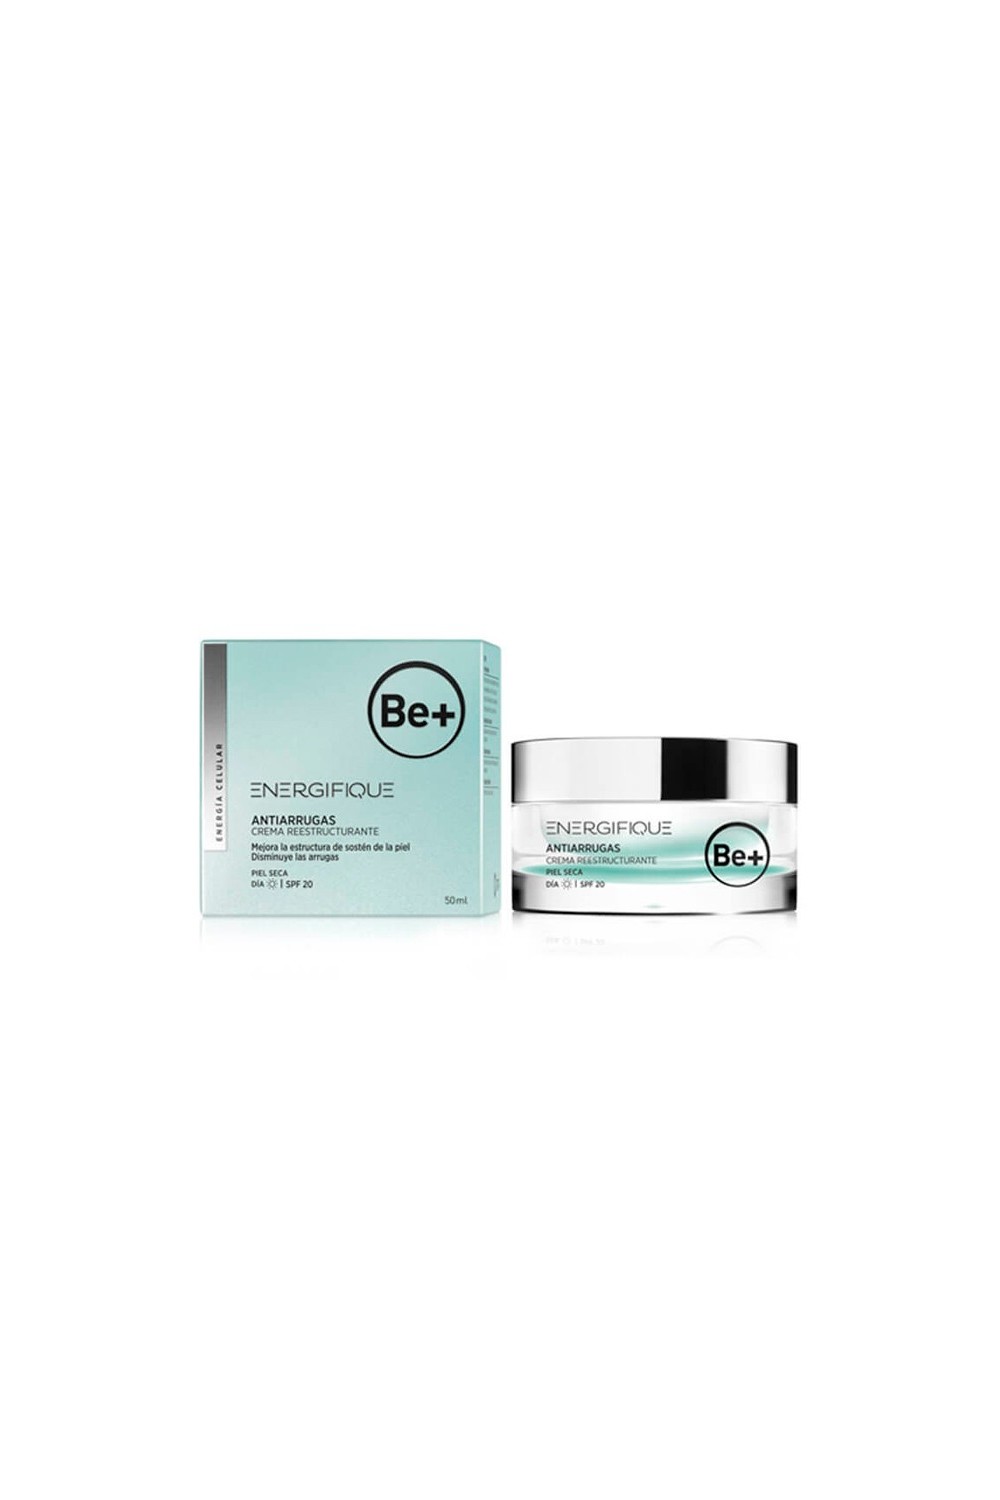 Be+ Energifique Anti-Wrinkle Restructuring Cream 50ml